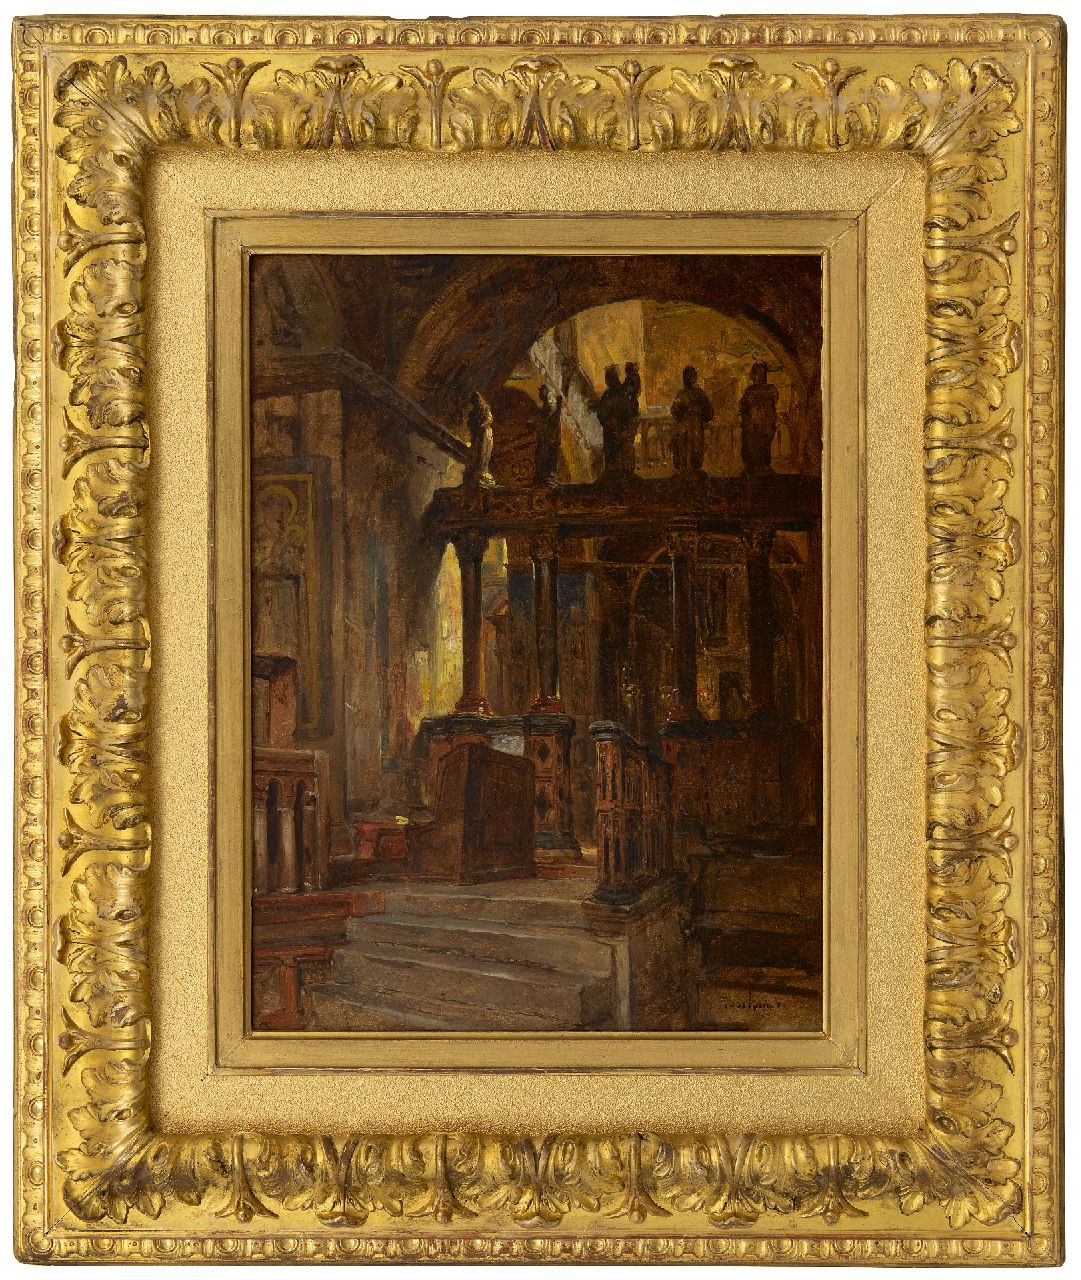 Bosboom J.  | Johannes Bosboom | Paintings offered for sale | Interior of an Eastern Orthodox Church, oil on panel 41.9 x 31.4 cm, signed l.r.